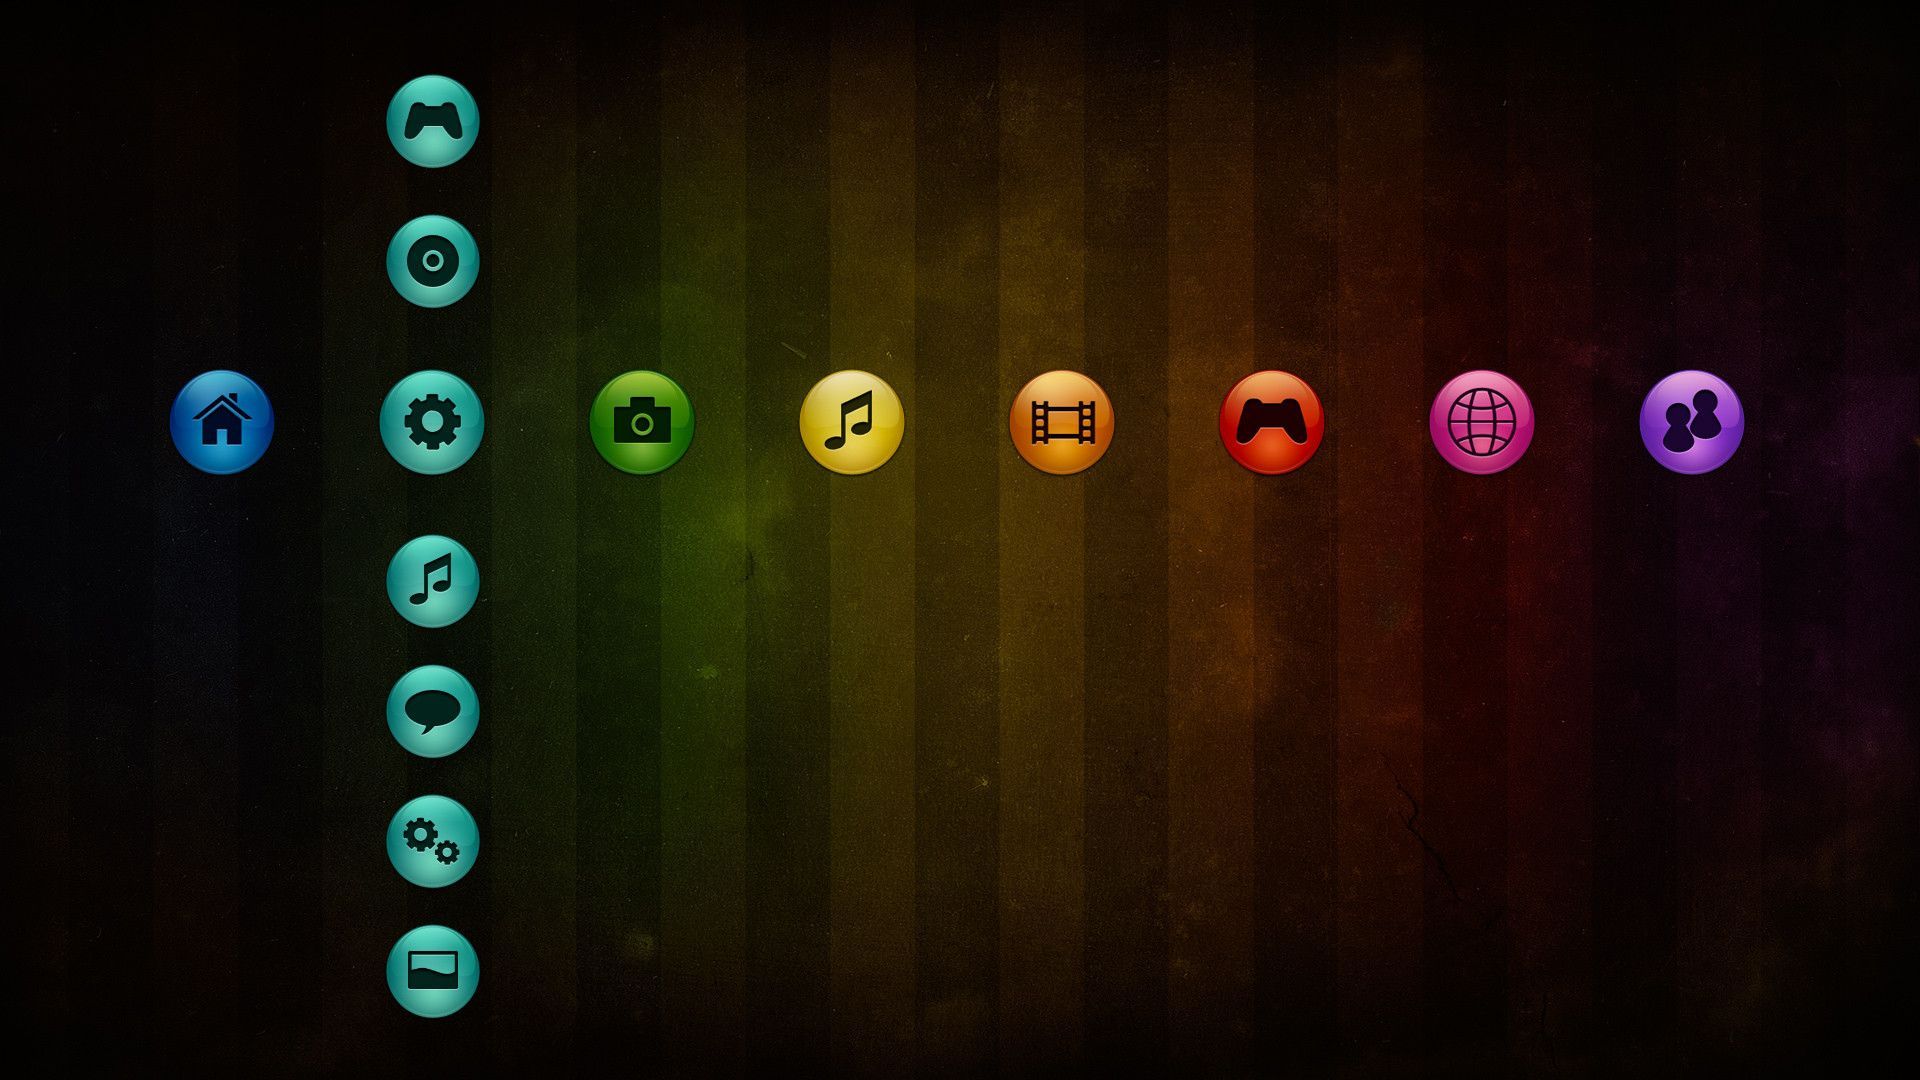 The PS3 Menu With Each Sub Category Icon Having Their Own Color